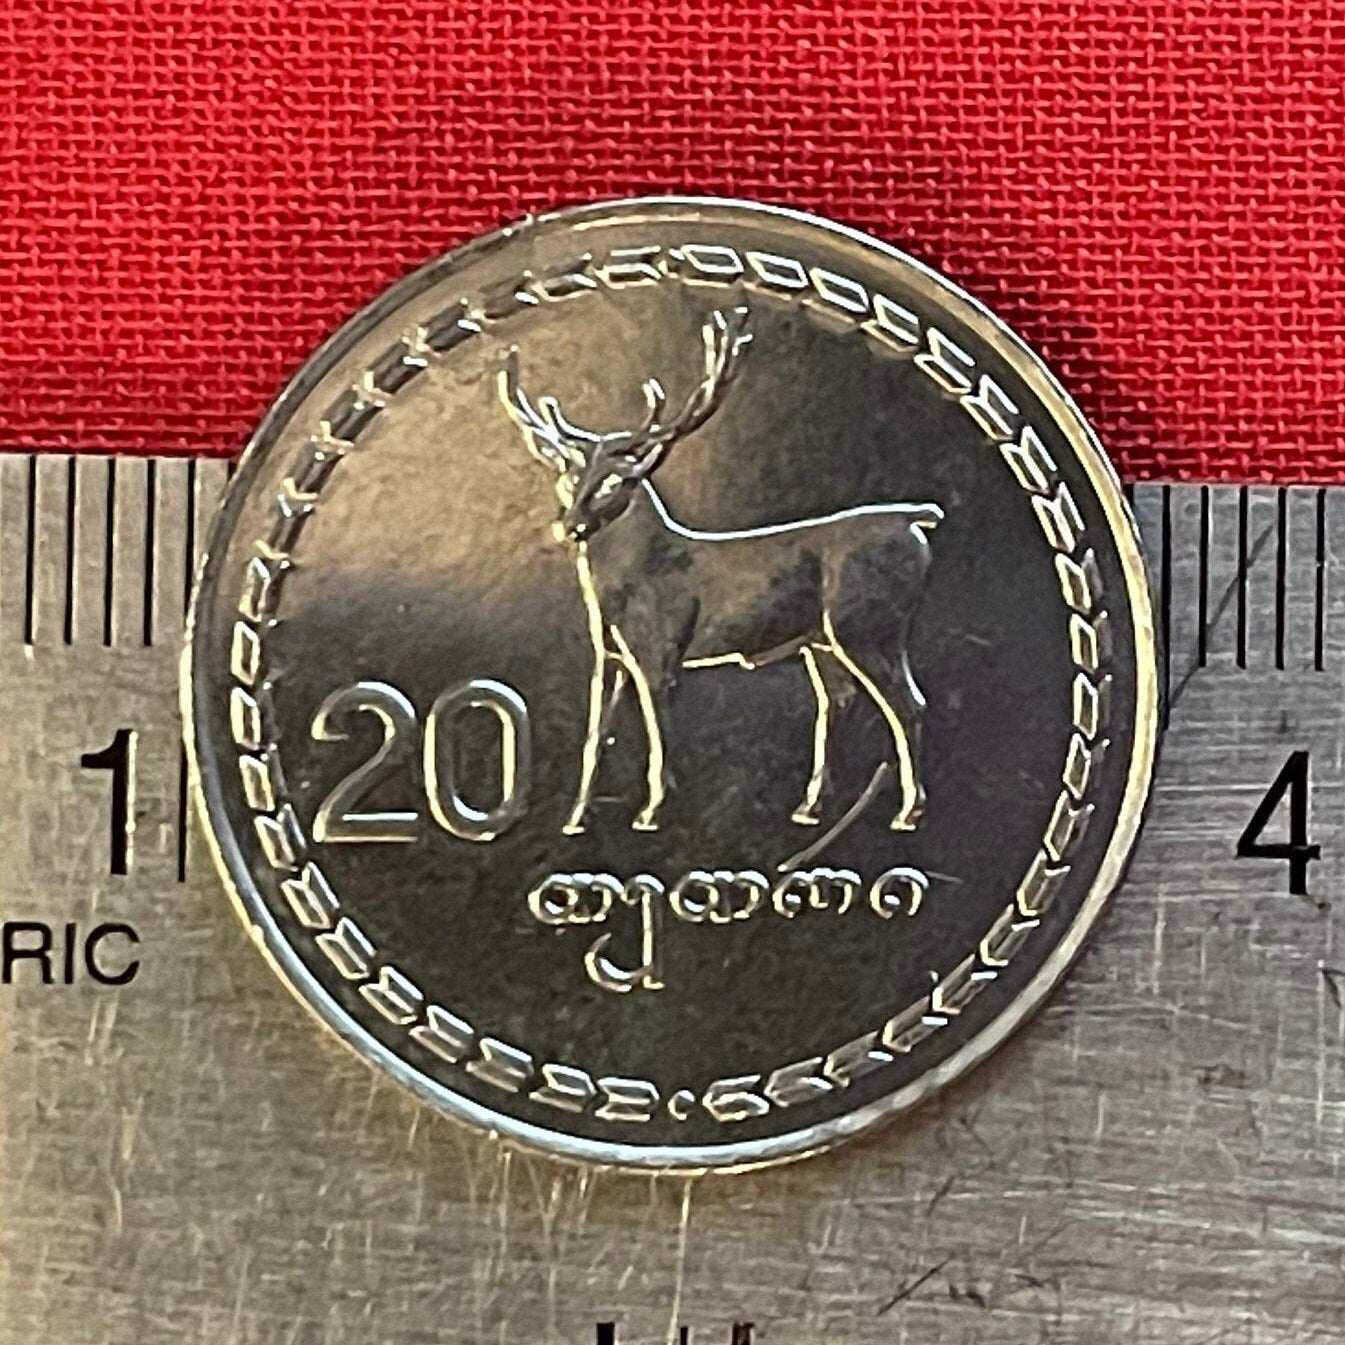 Red Deer & Borjgali 20 Tetri Georgia Authentic Coin Money for Jewelry and Craft Making (Tree of Life) (Niko Pirosmani Painting) (1993)